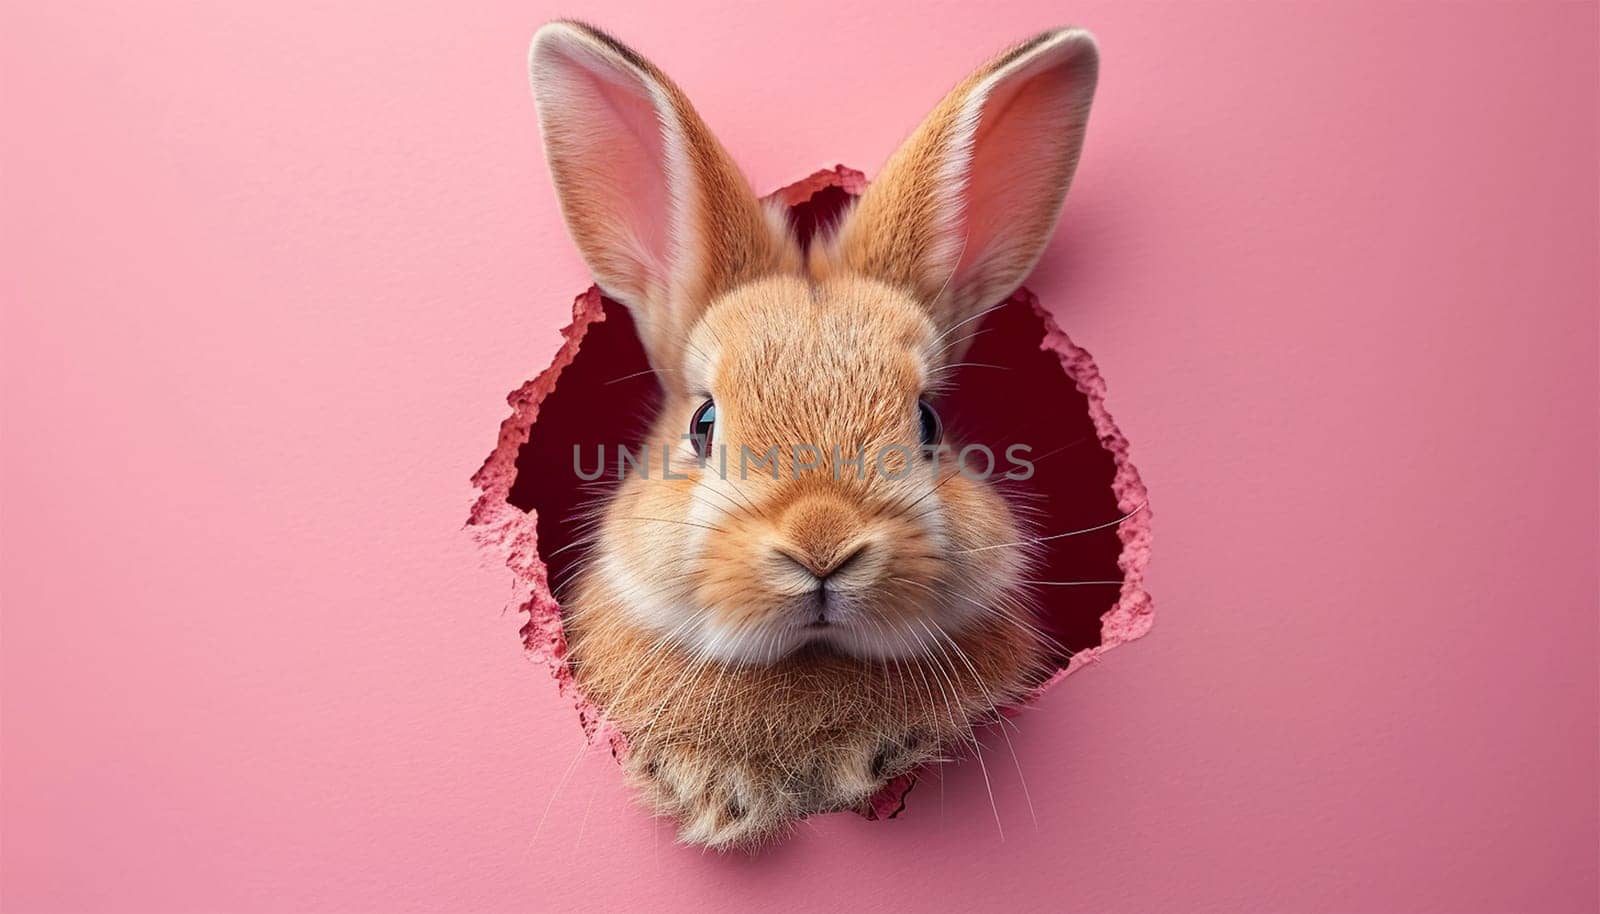 Cartoon cute bunny looking out of a cut hole bright pink background. illustration. Spring holiday and Easter background. Copy space Happy Easter by Annebel146